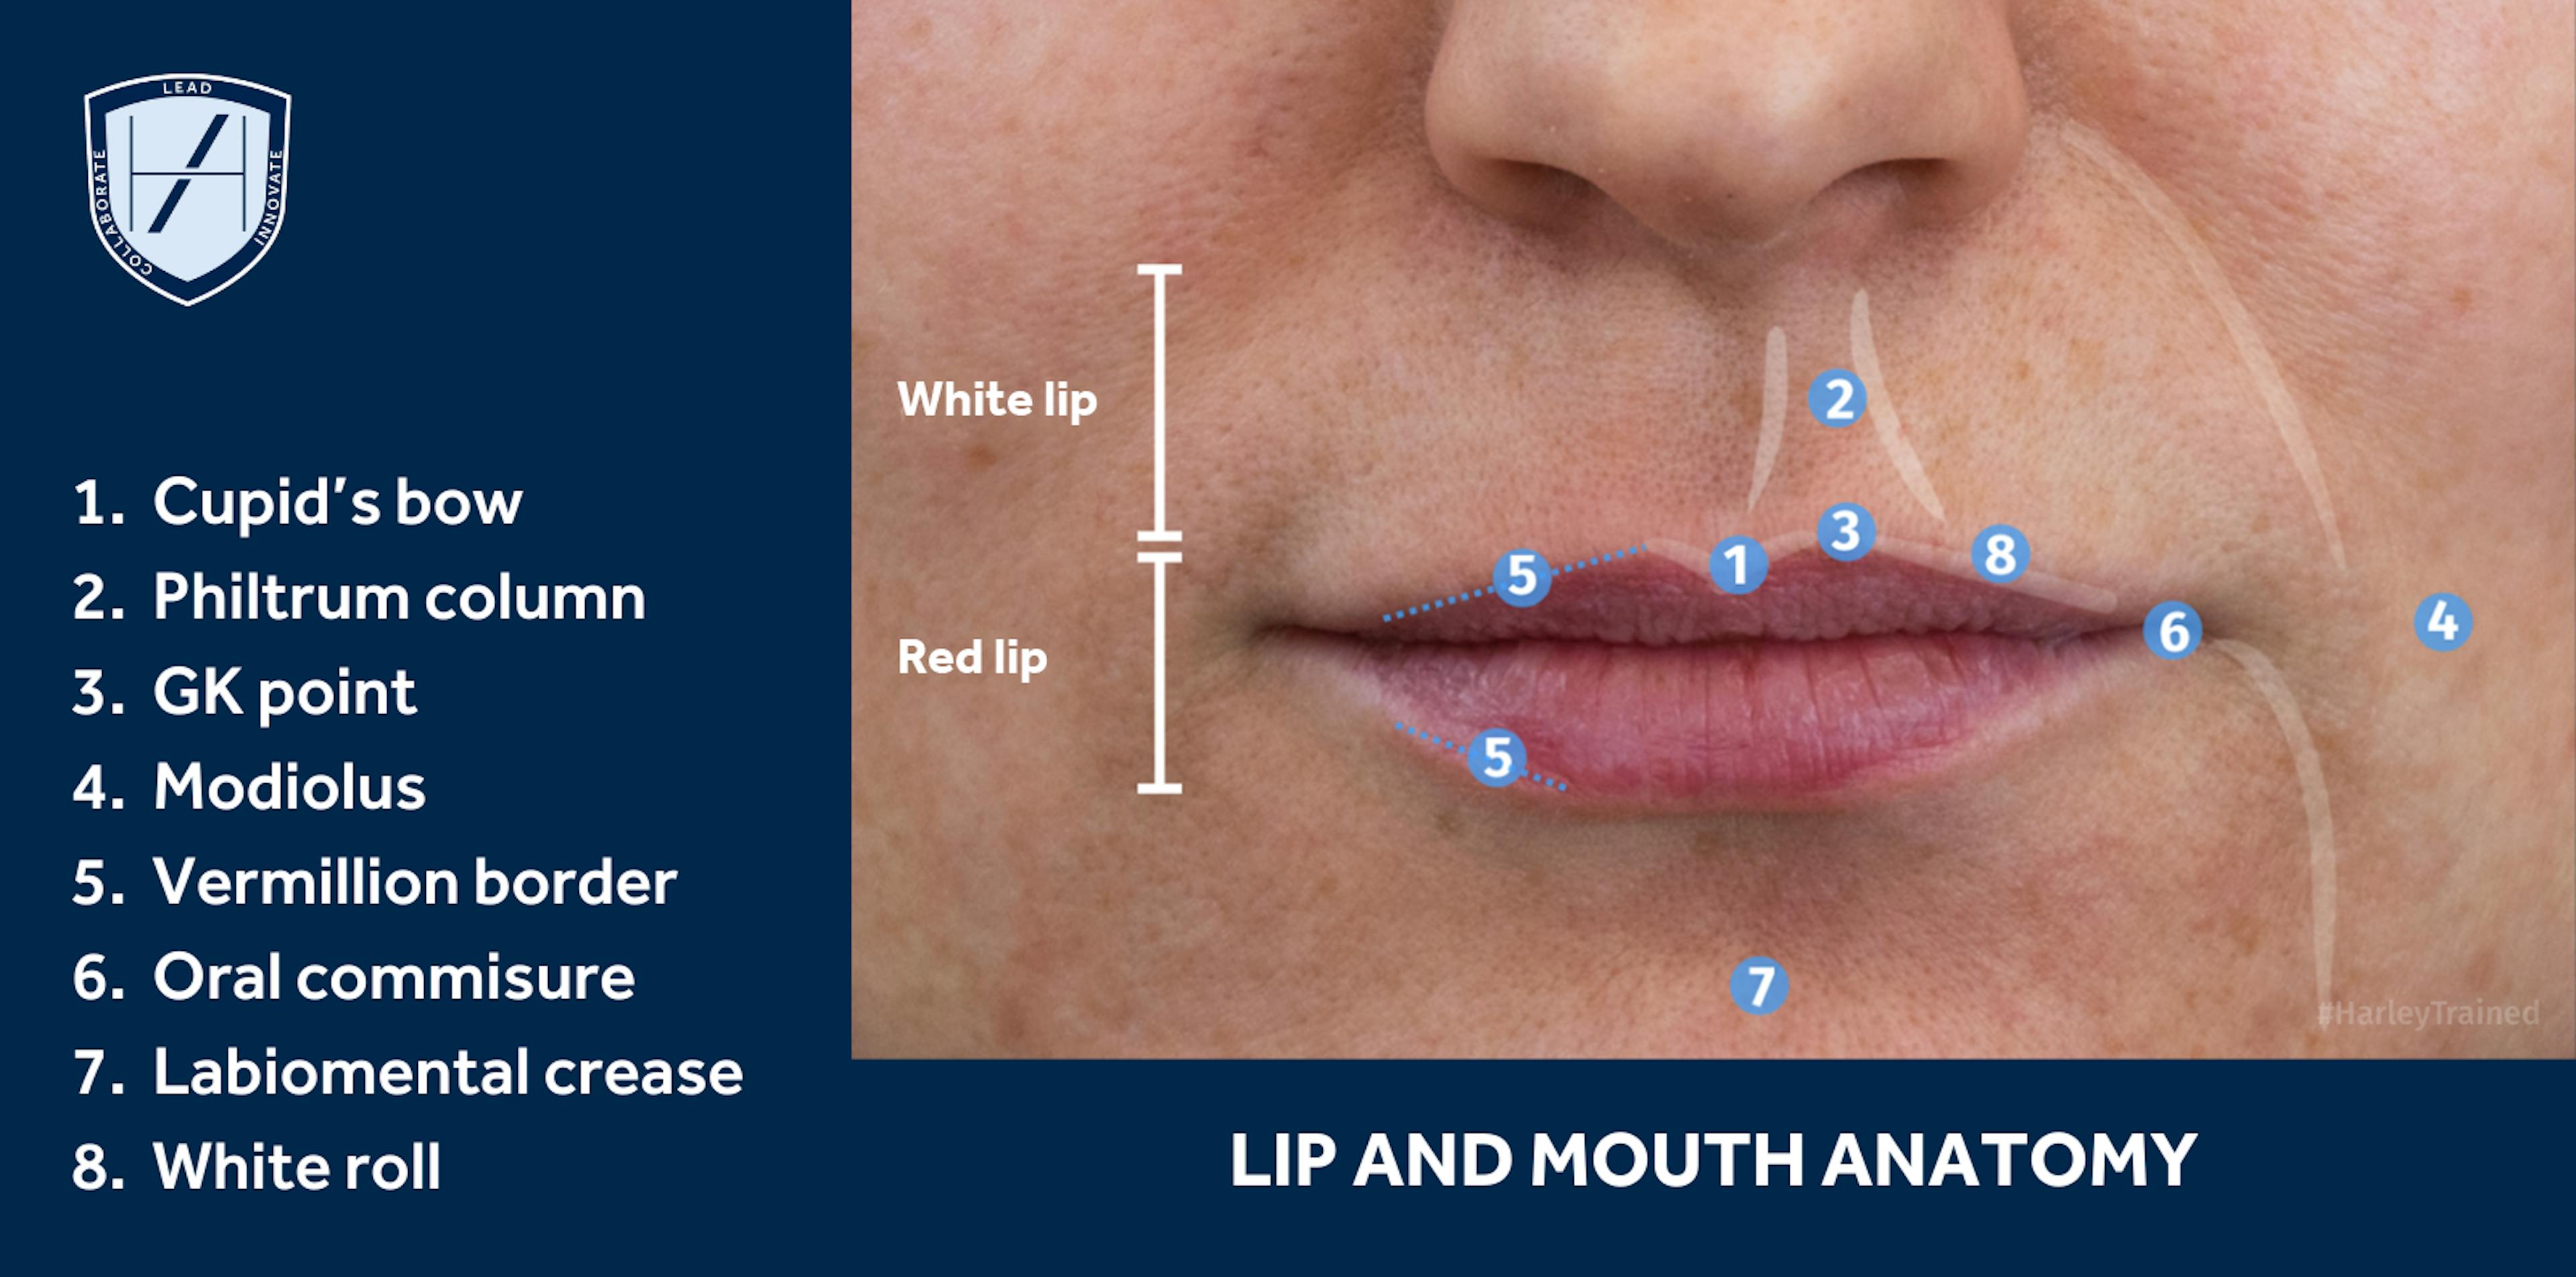 LIP AND MOUTH ANATOMY